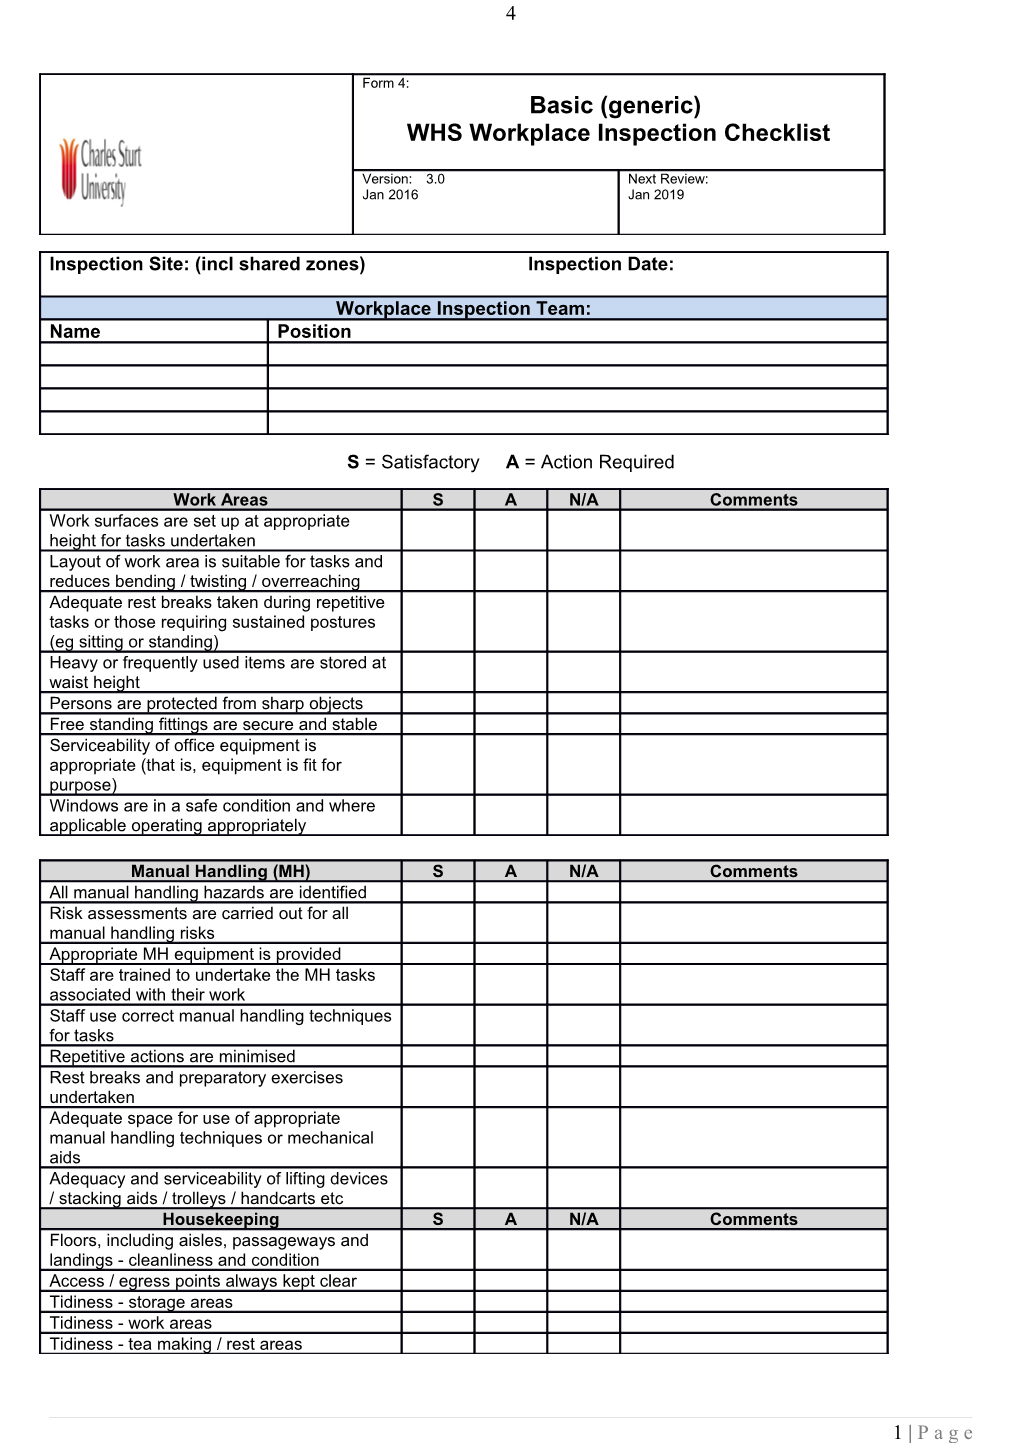 Workplace Inspection Checklist Guidelines